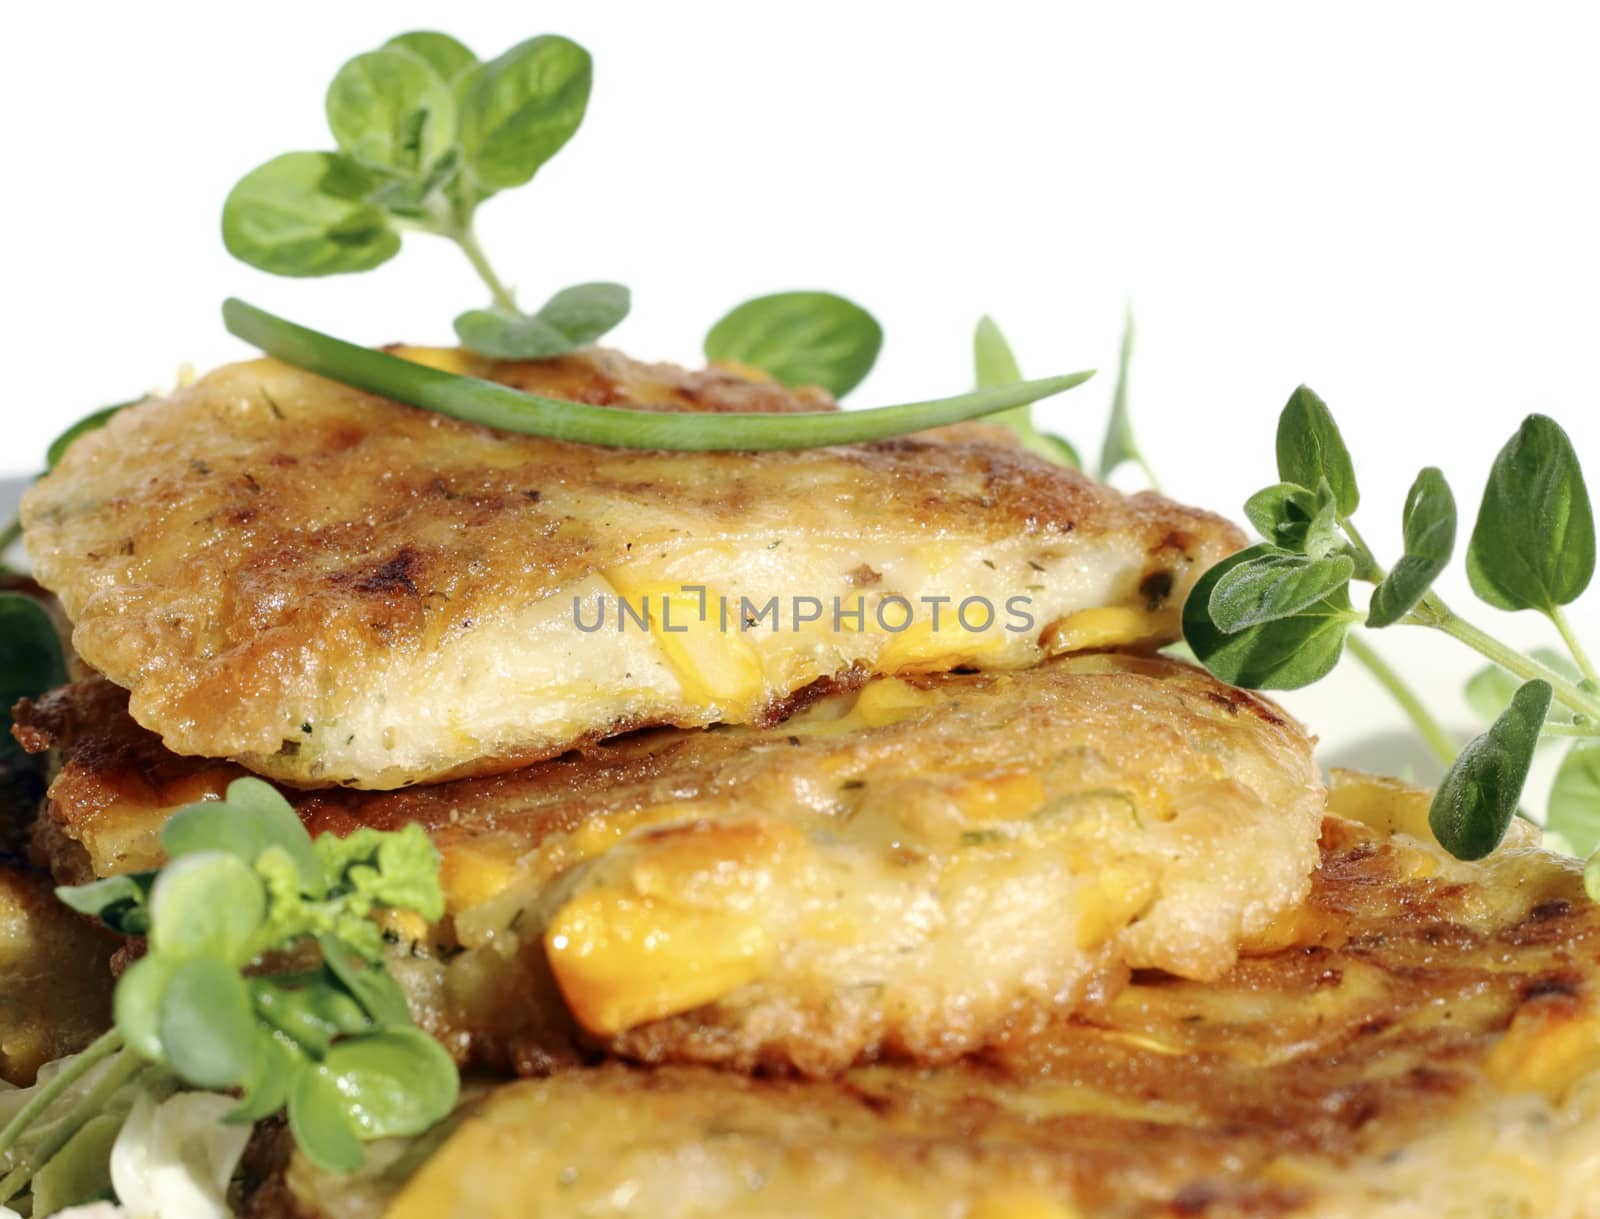 It is fried pancakes with sweet corn